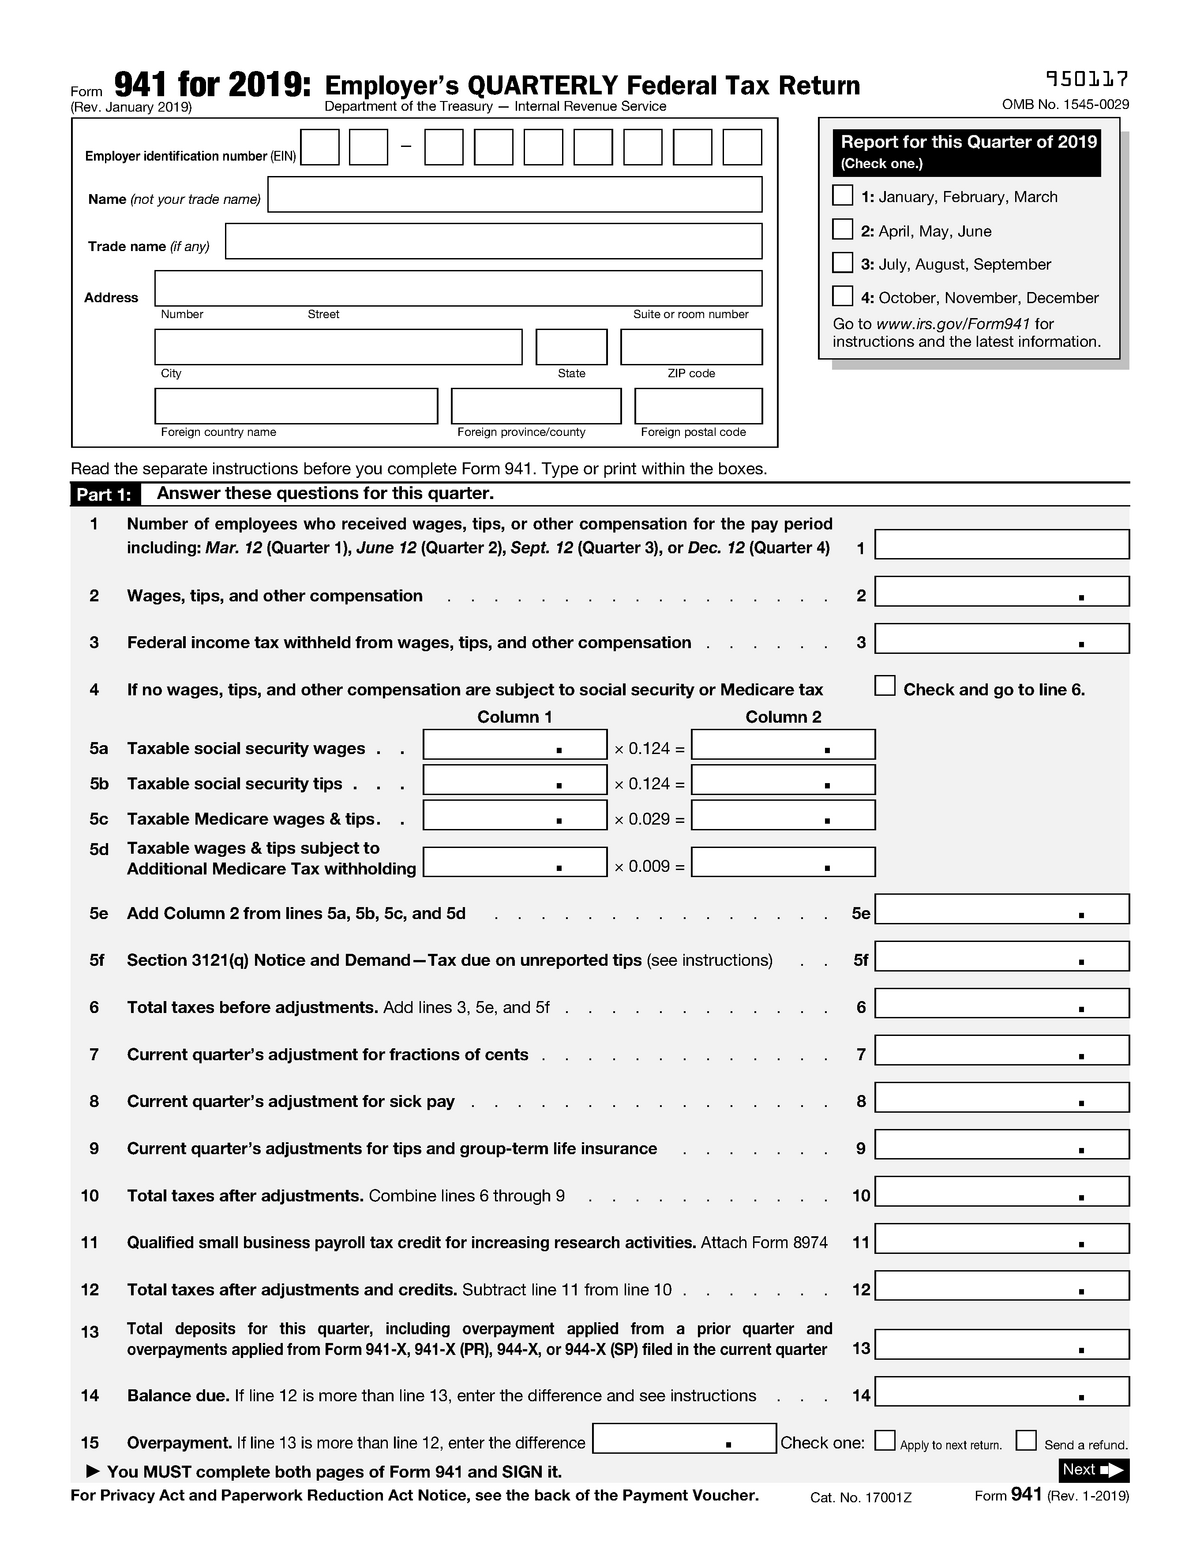 blue-summit-supplies-100-w2-forms-copy-a-only-2020-tax-forms-for